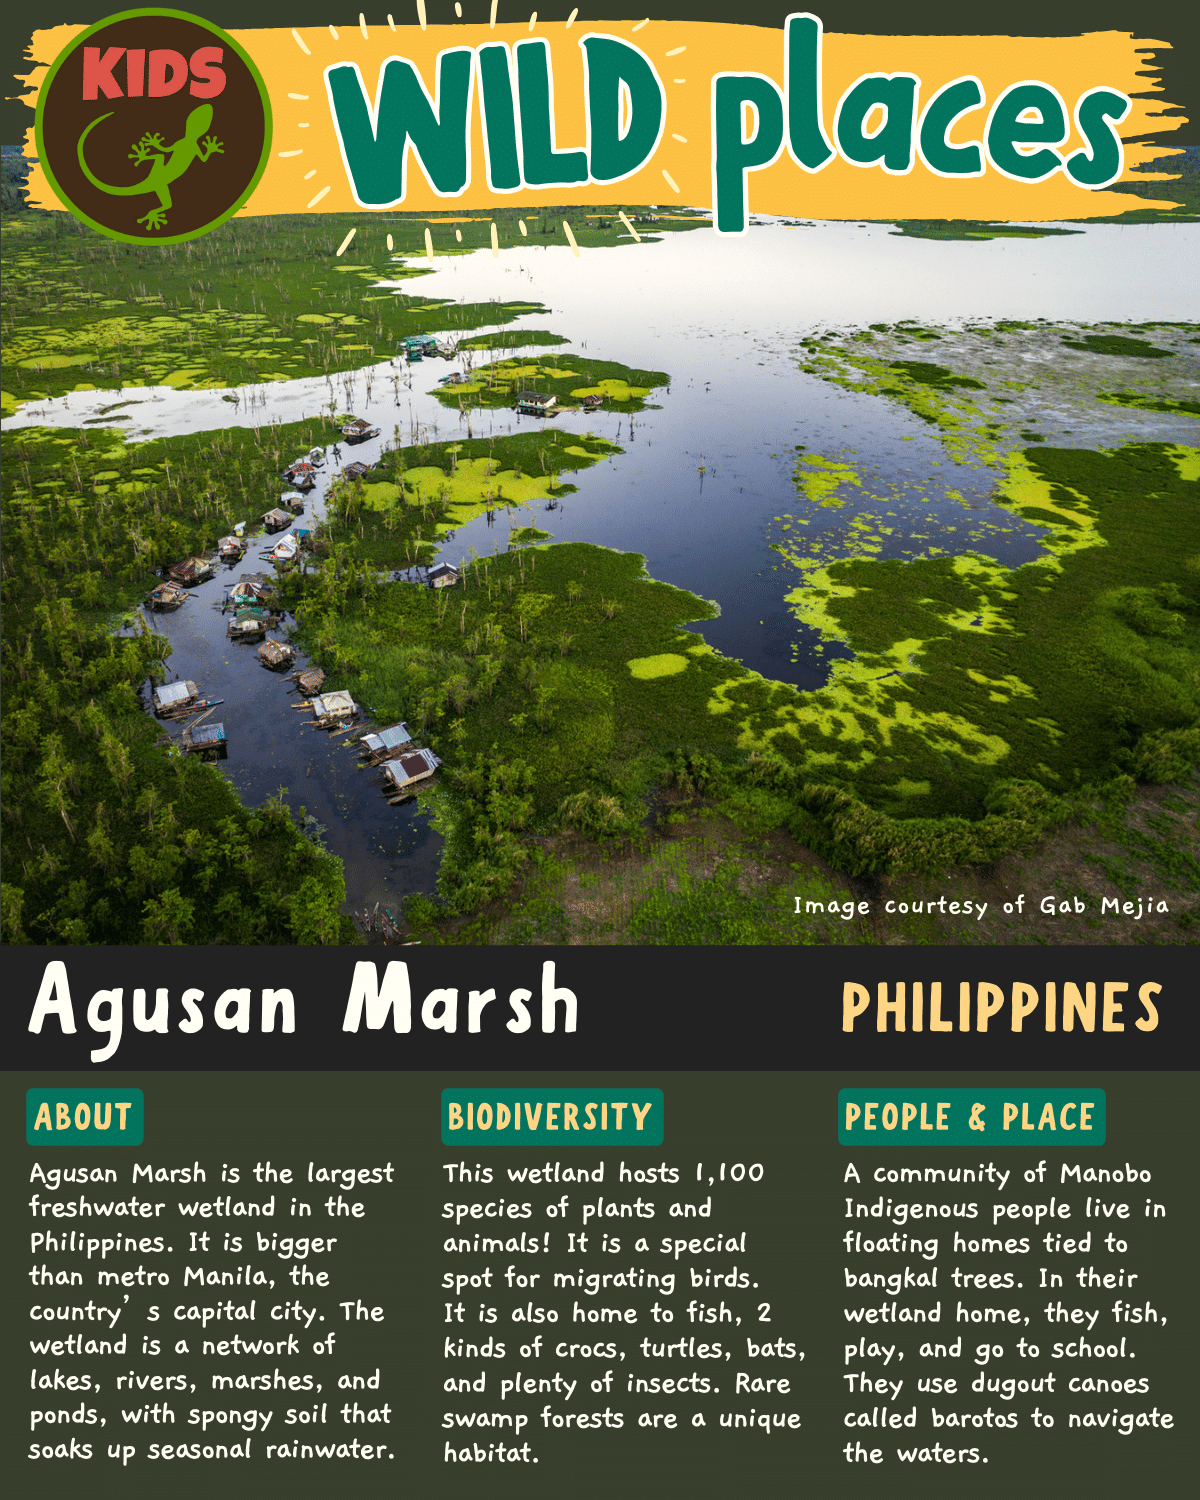 Agusan Marsh in the Philippines